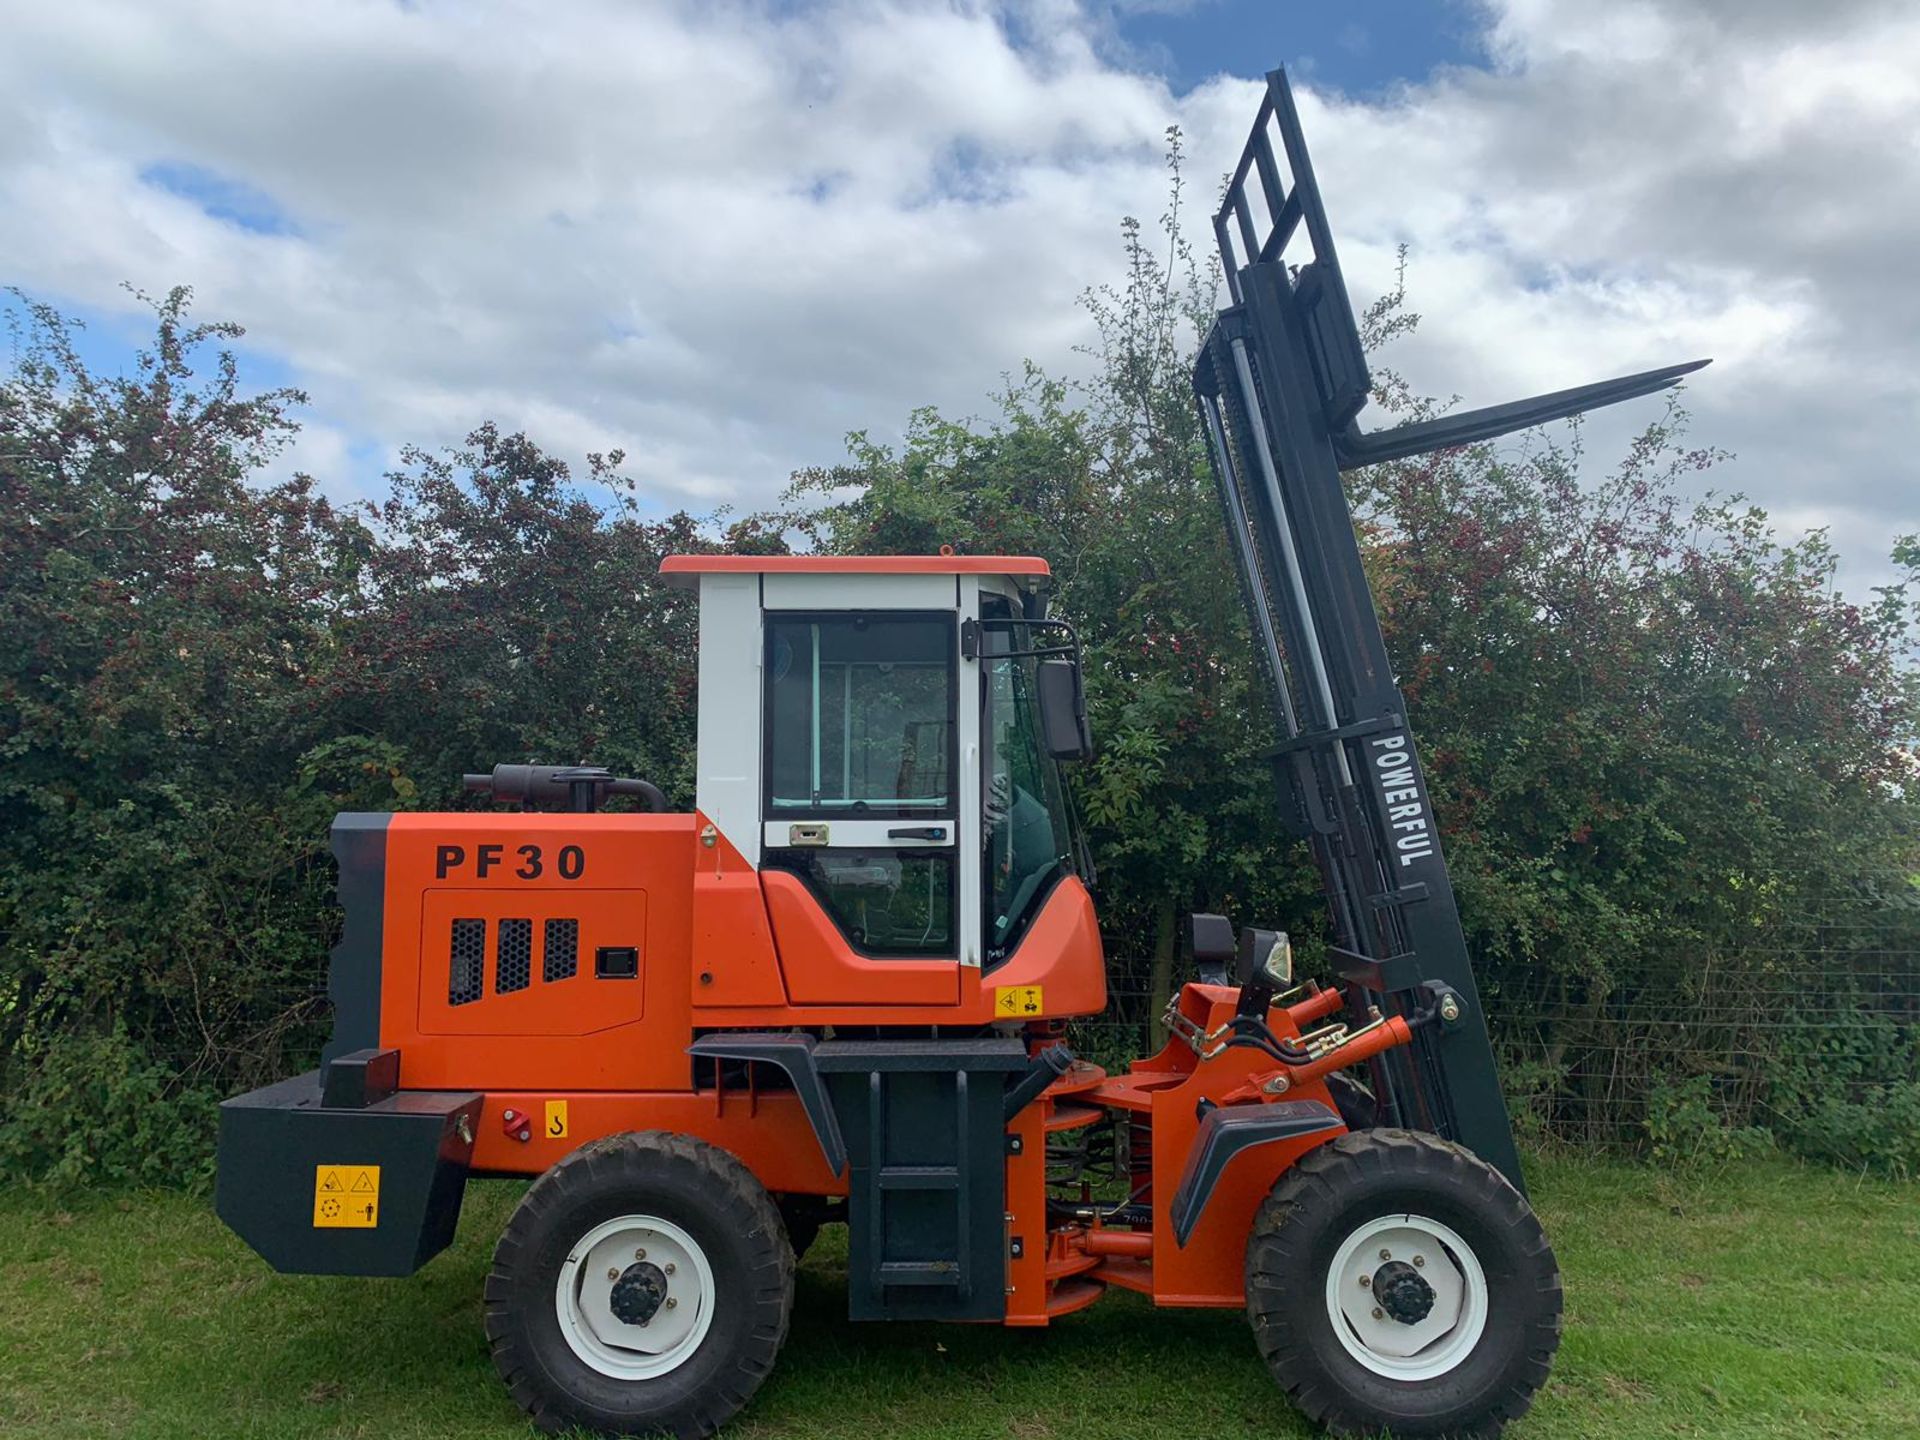 BRAND NEW 2019 POWERFUL PF30 4X4 ROUGH TERRAIN POWERFUL FORKLIFT C/W 2 STAGE MAST *PLUS VAT* - Image 3 of 12